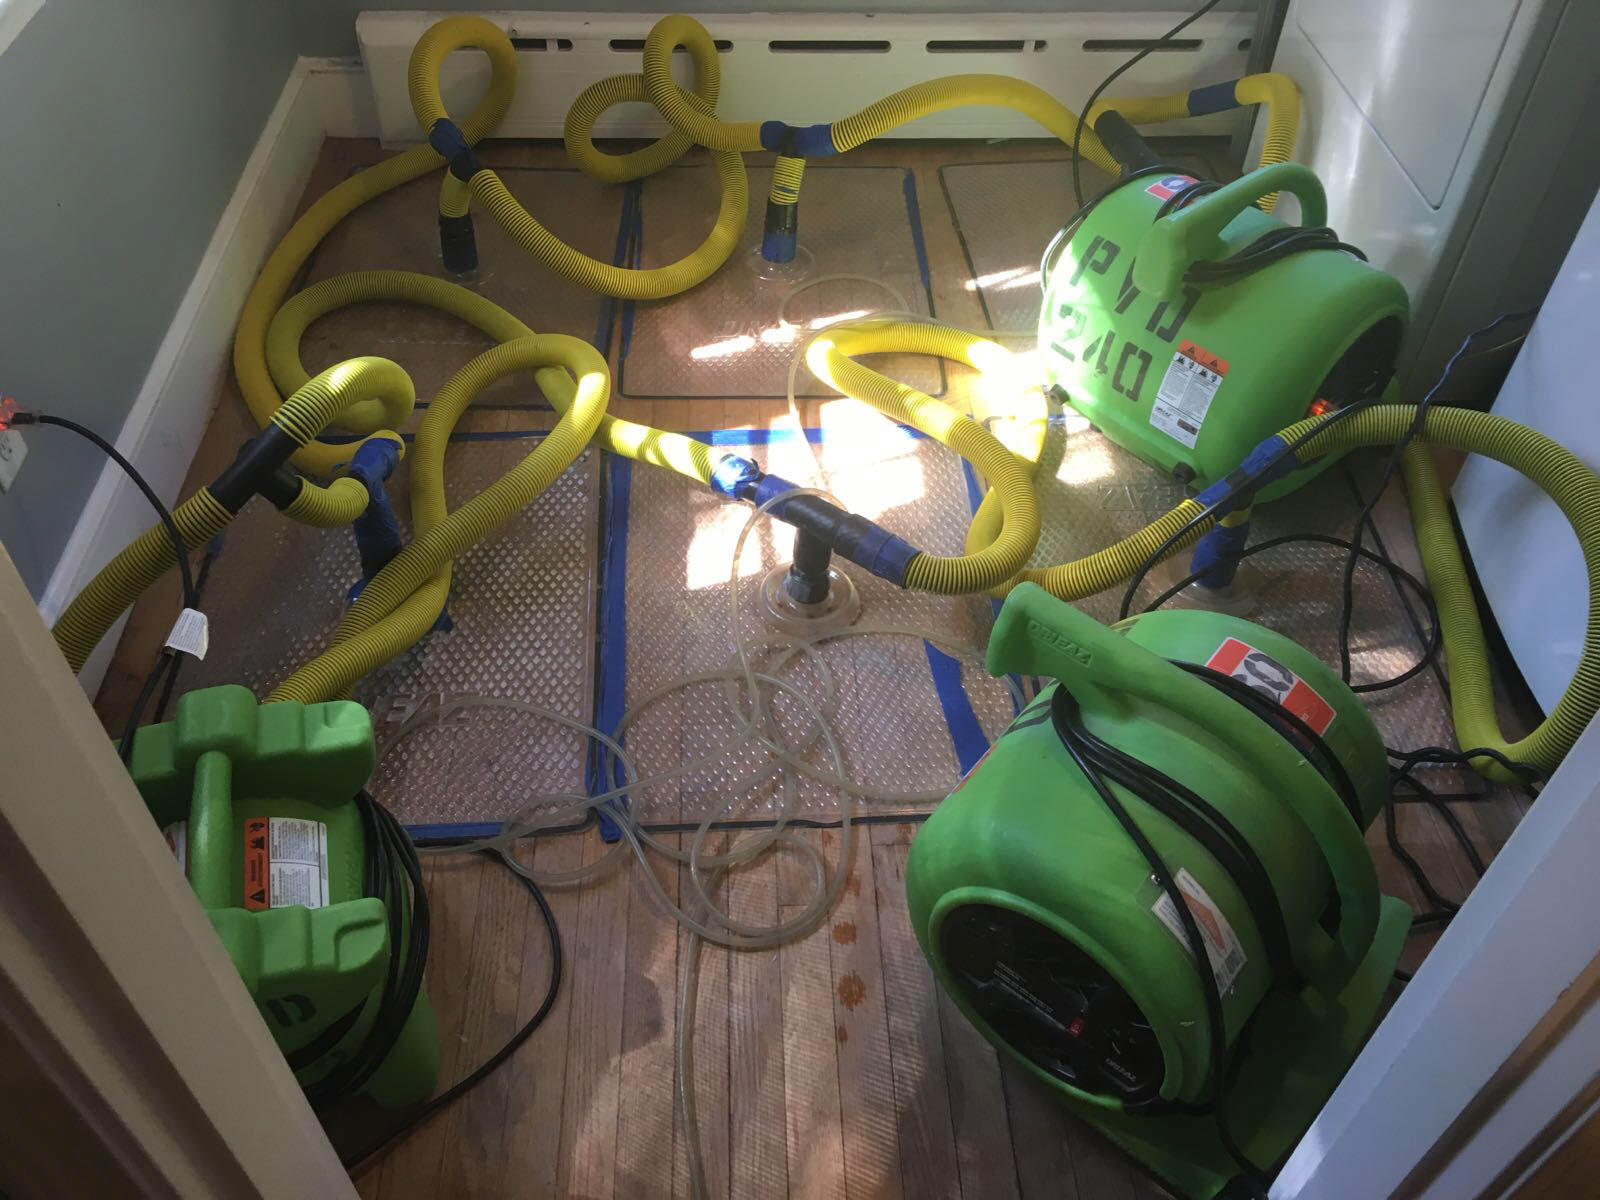 Green Drying Equipment and Injectidry System extracting water from hardwood floors.